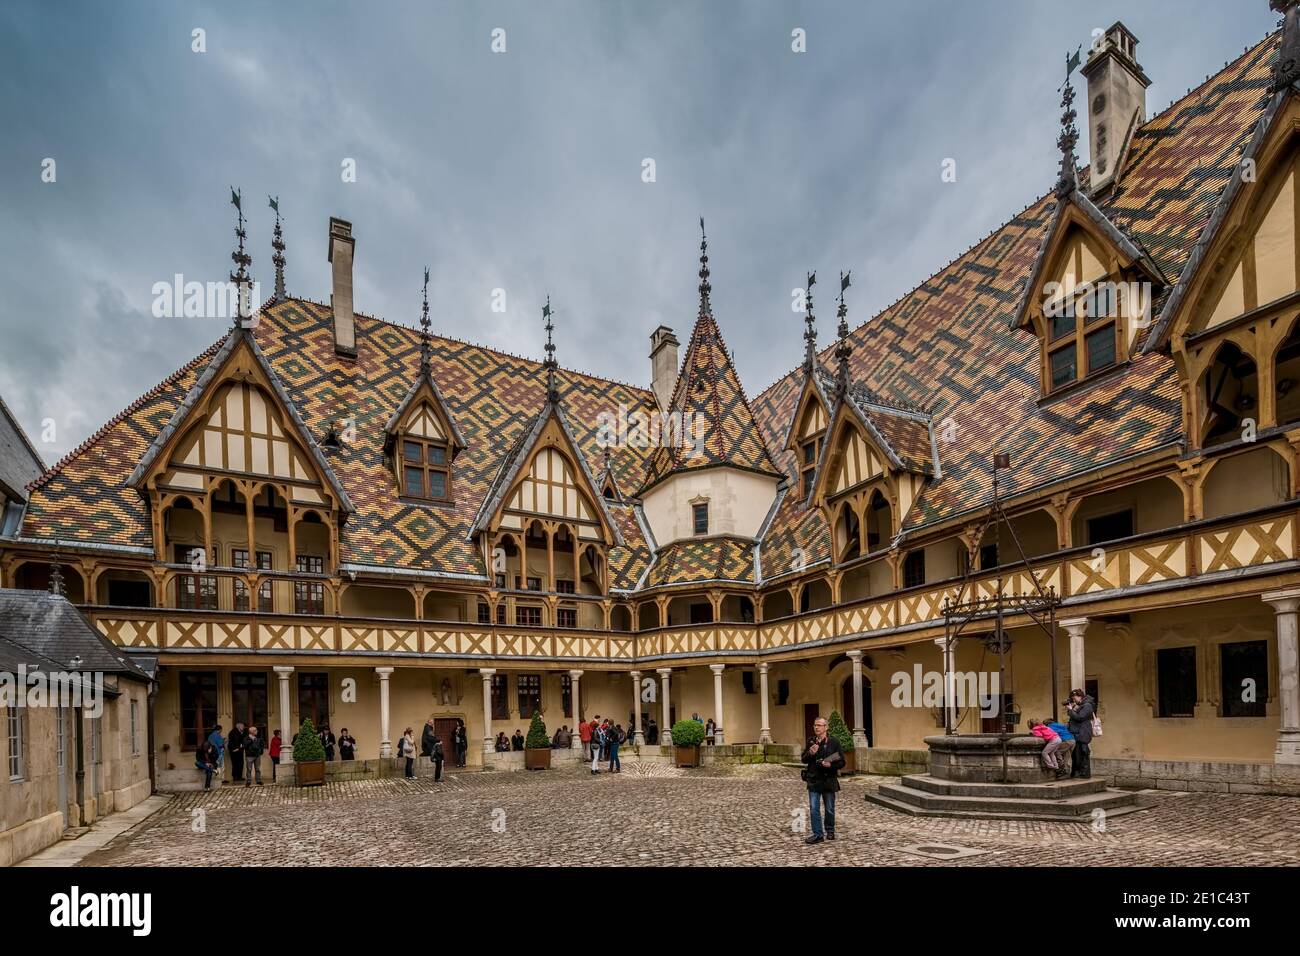 Beaune, France May 19th 2013 : The beautiful Hotel Dieu hospital museum at Beaune, famous for its polychrome roof architecture Stock Photo